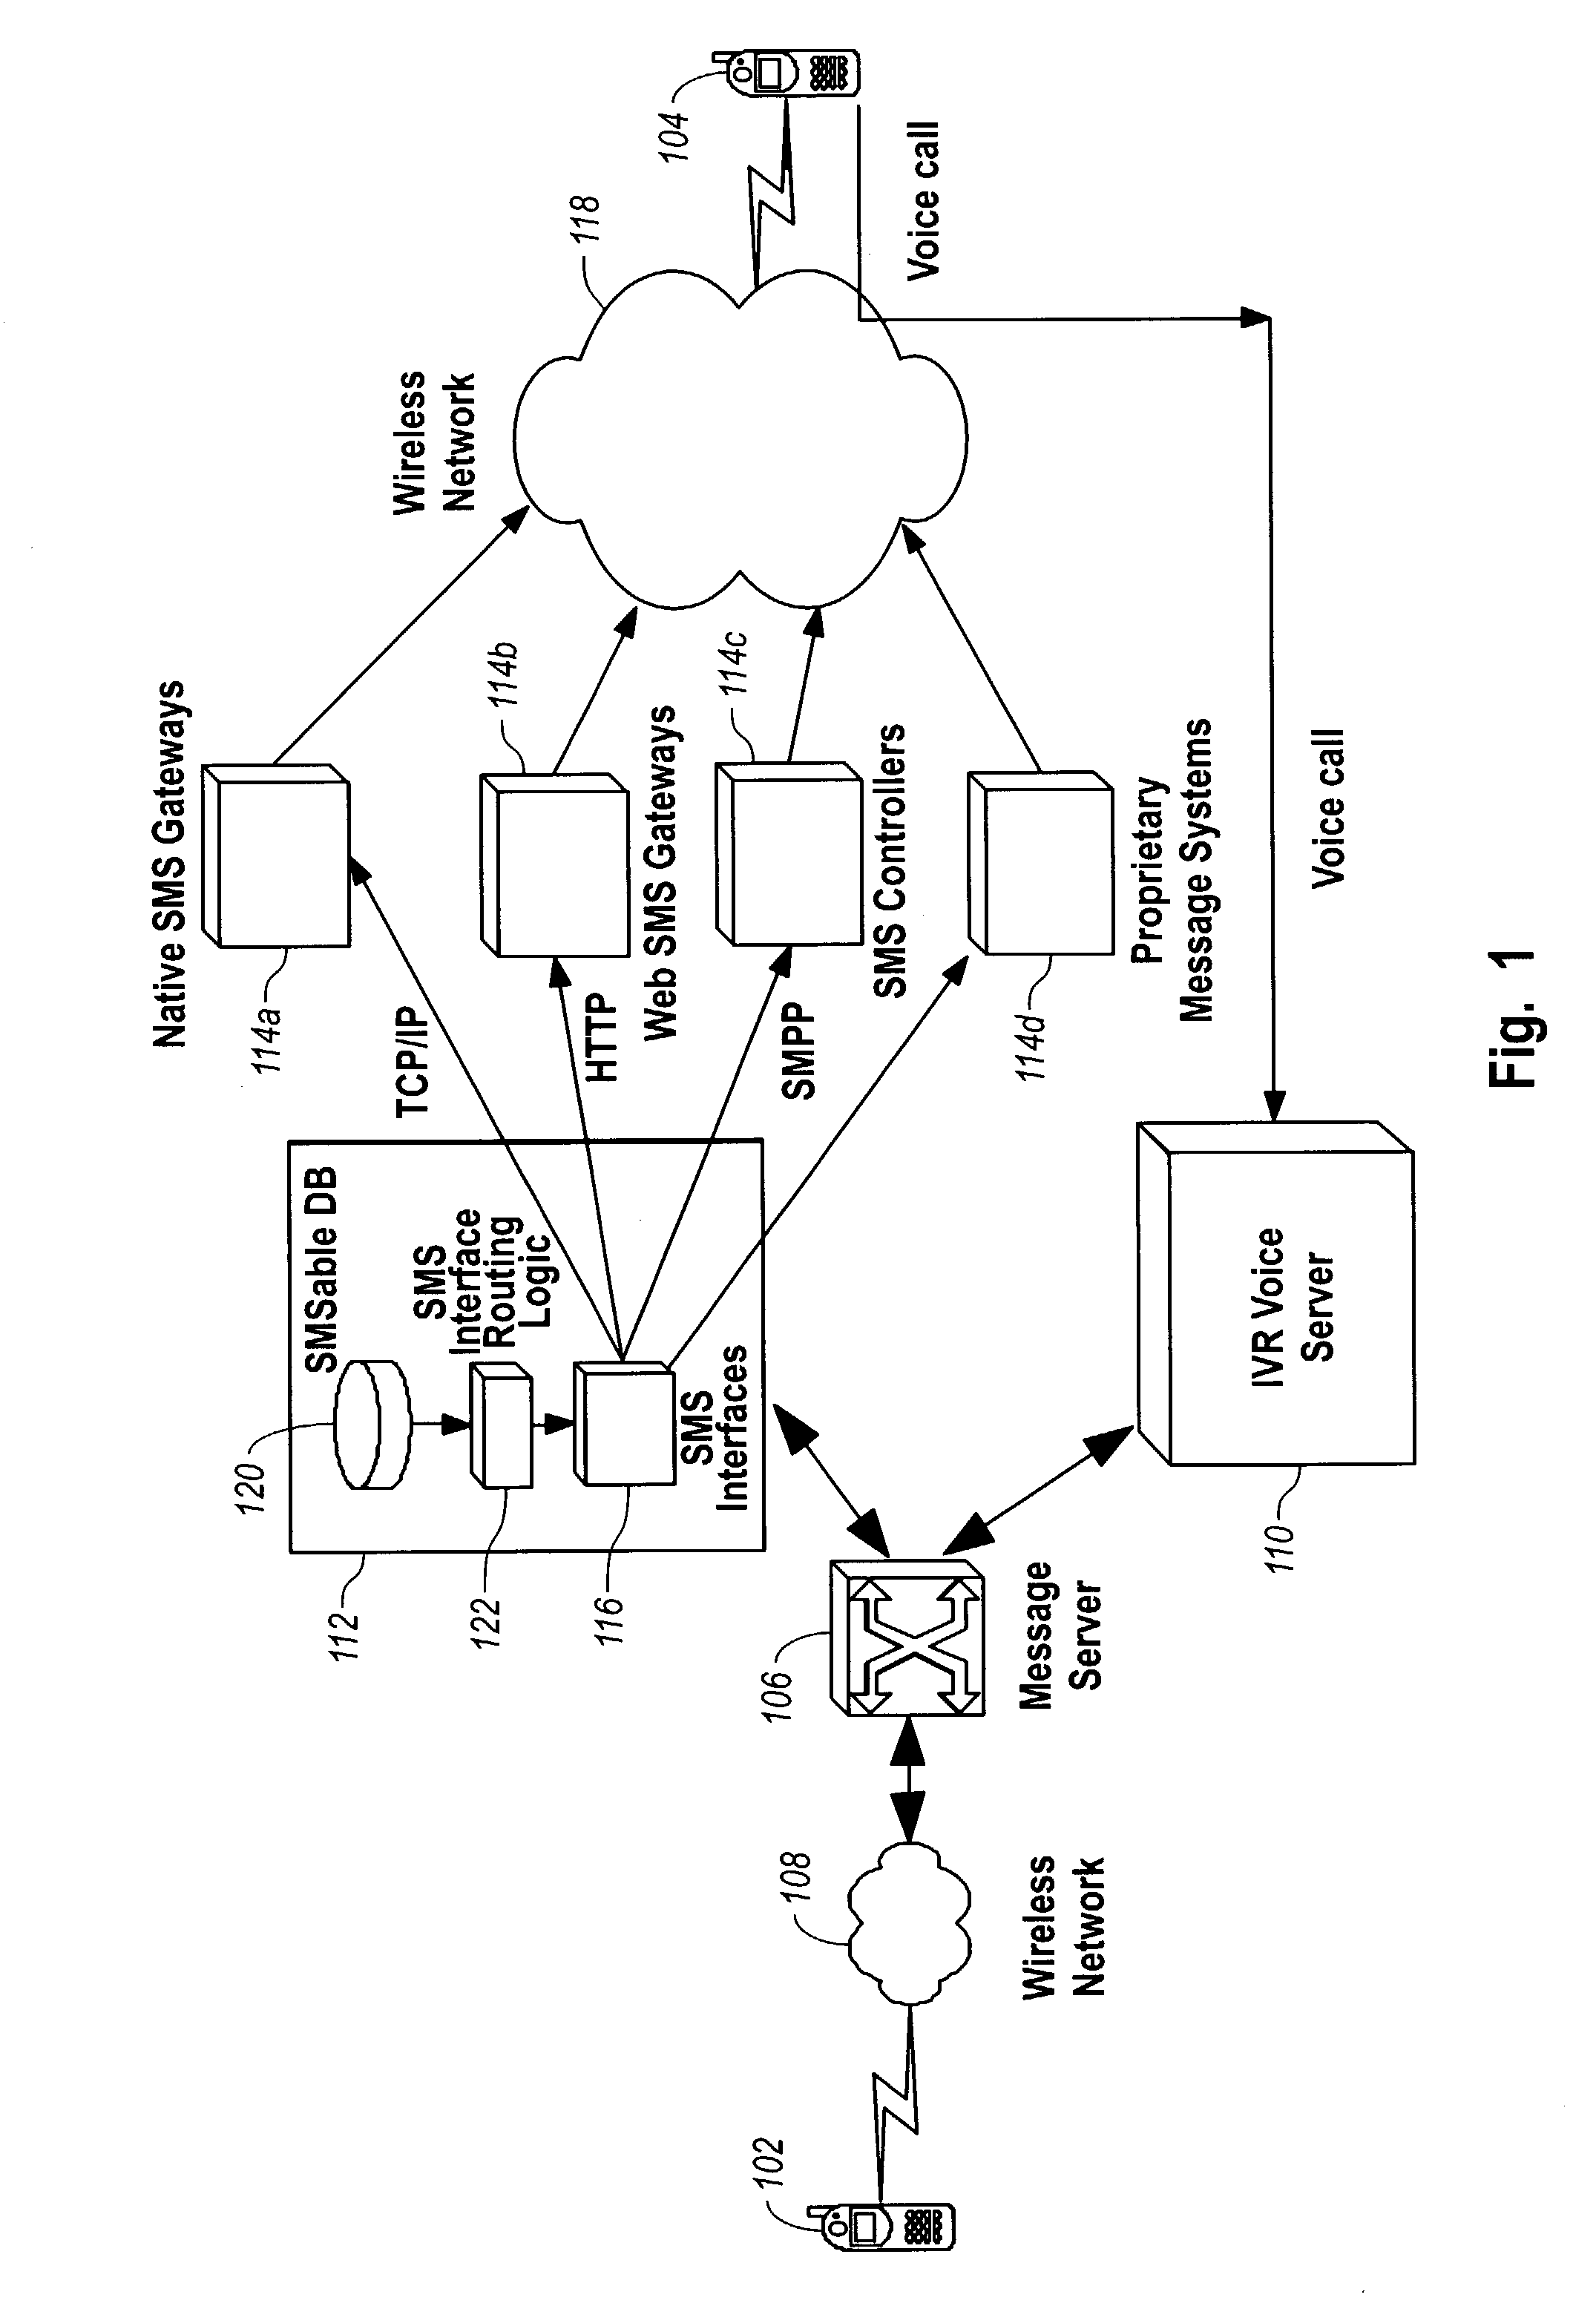 Delivery of an instant voice message in a wireless network using the SMS protocol